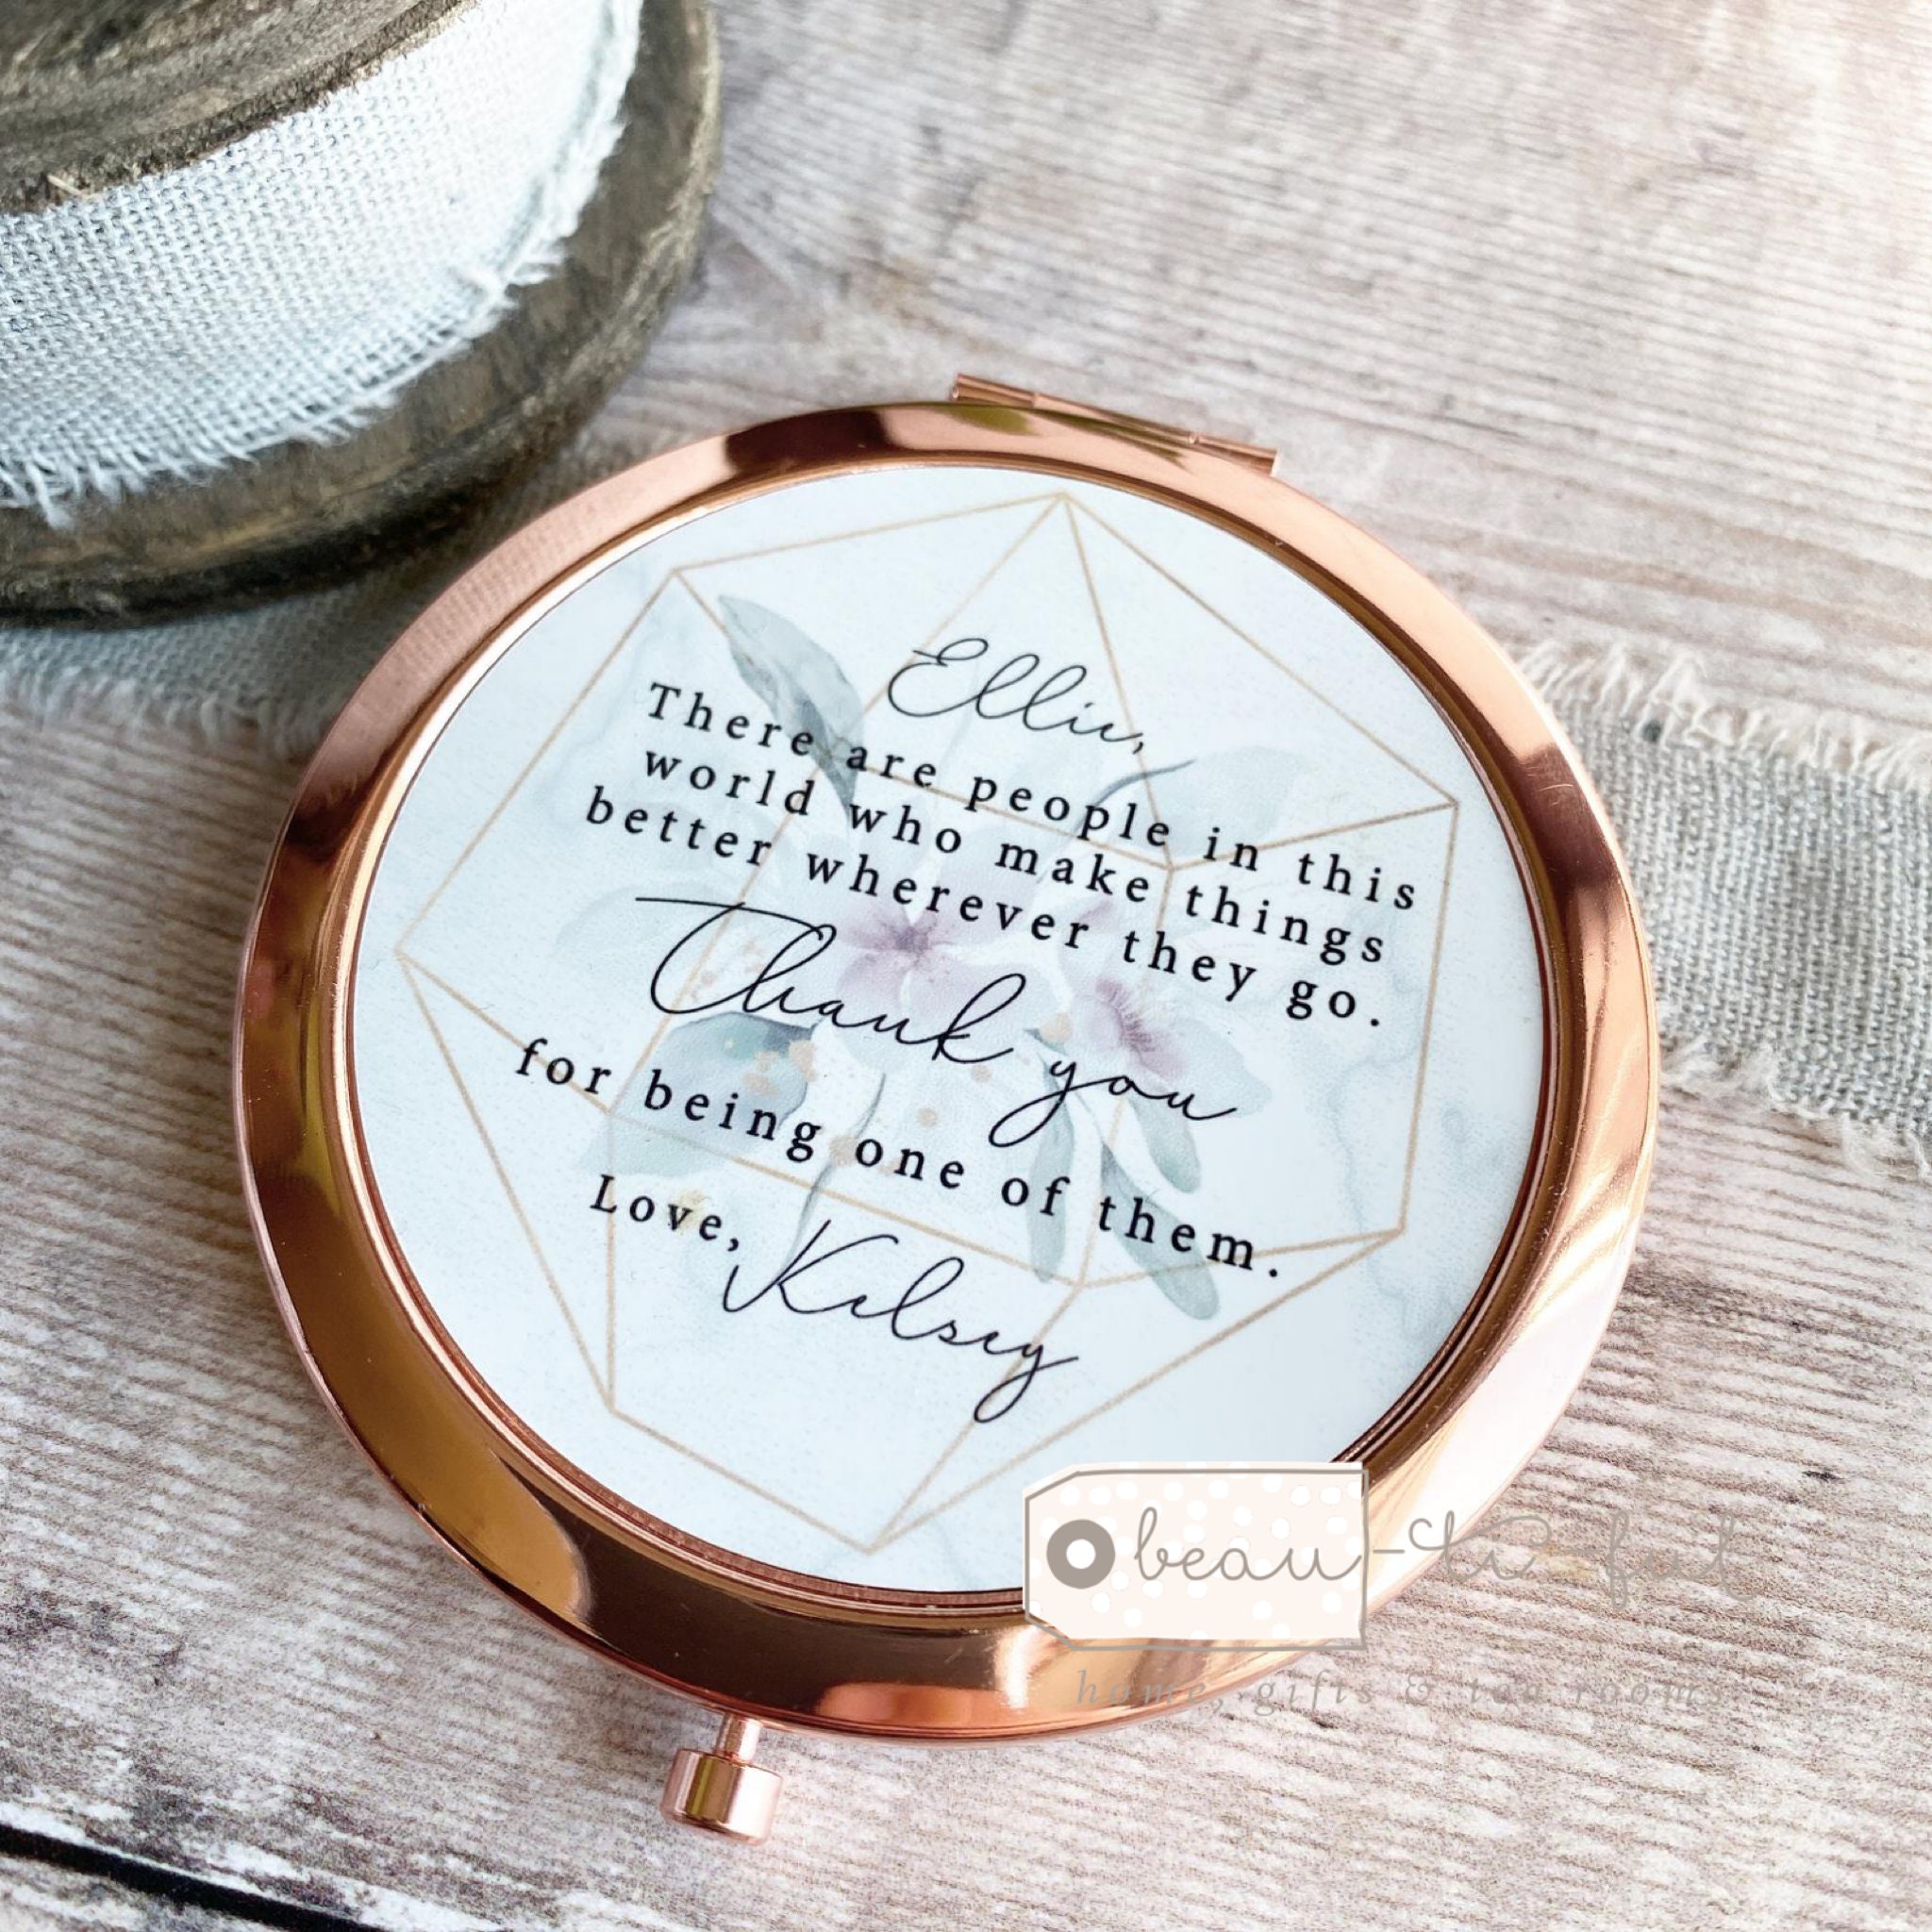 3. Personalized Compact Mirror